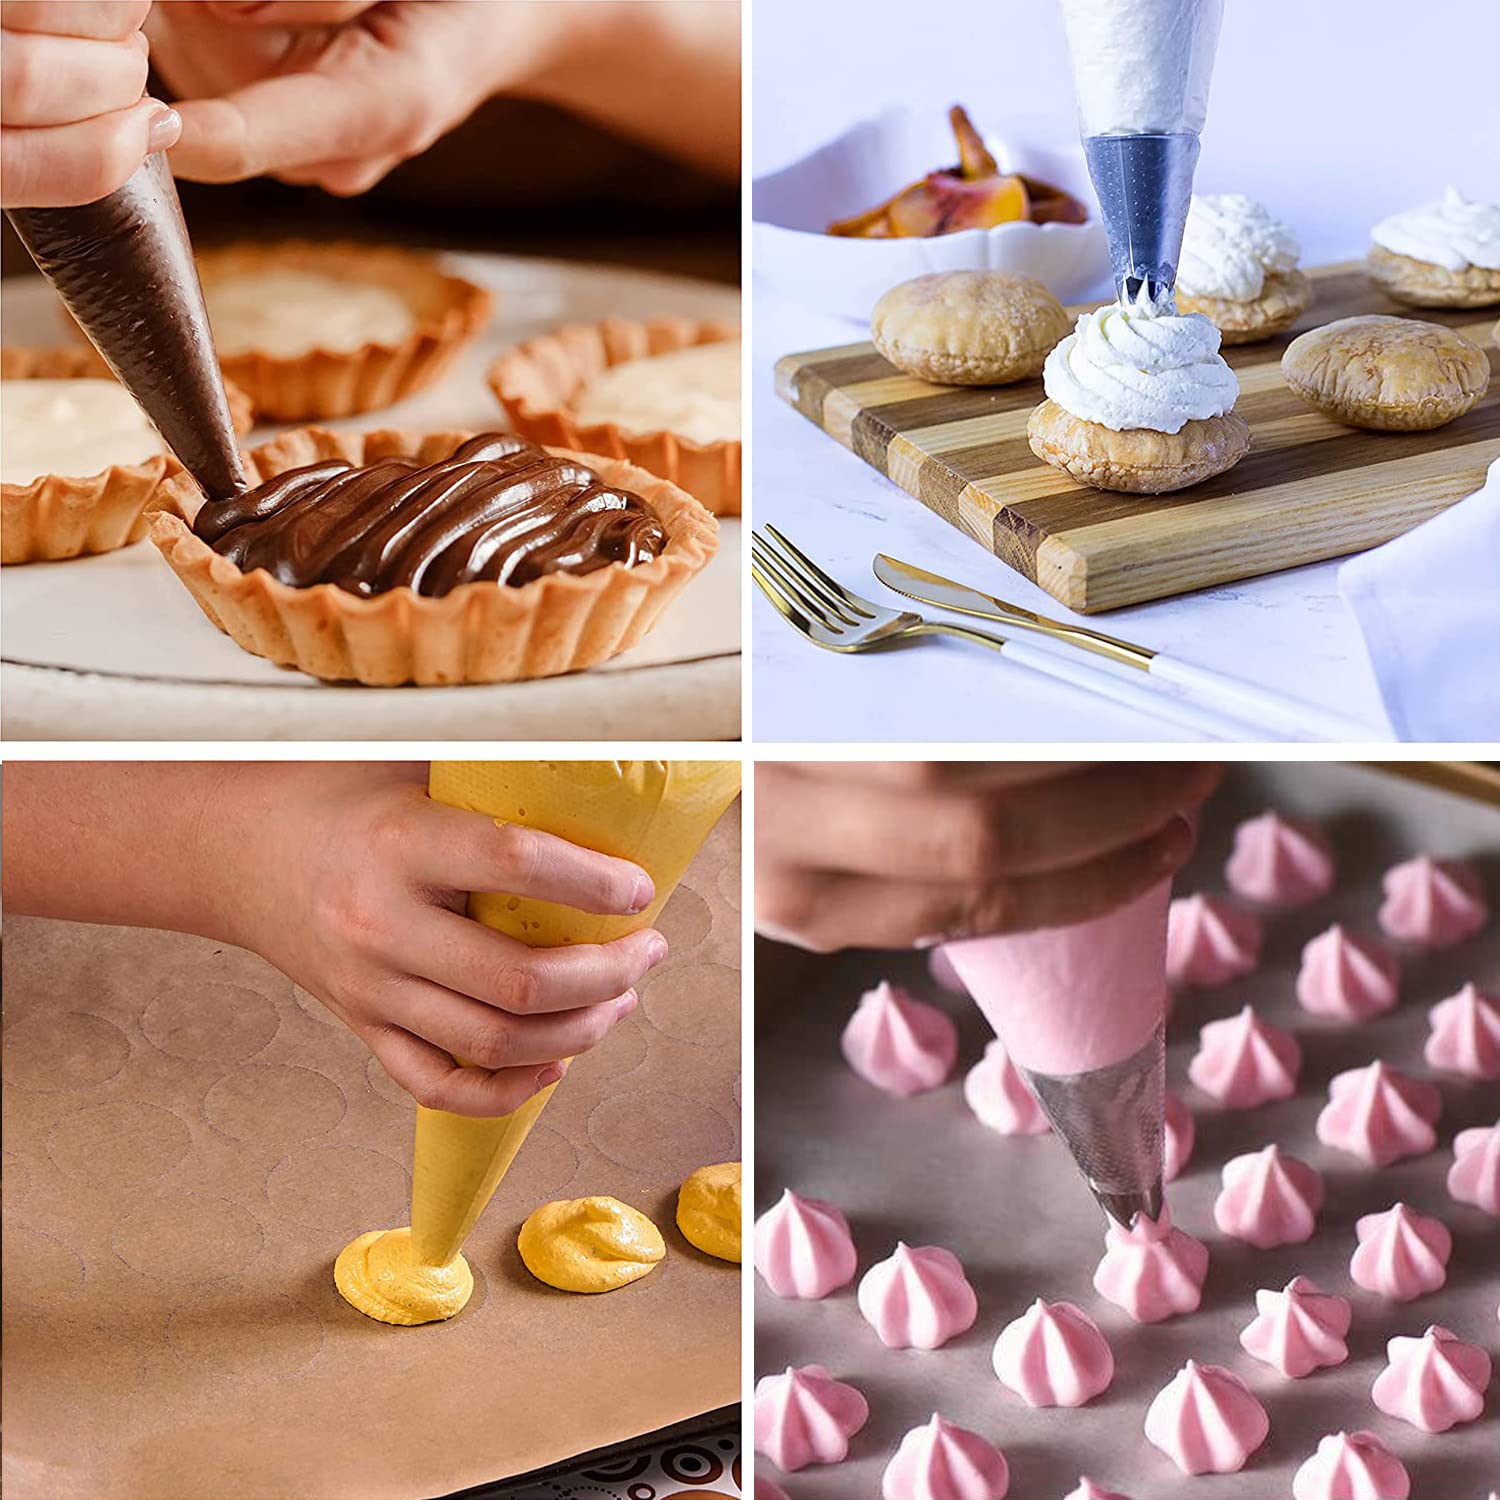 thinkstar Tipless Piping Bags For Royal Icing,12 Inch Disposable Pastry Bags,100 Pcs Icing Bags For Cake, Cream Frosting And Cookie …